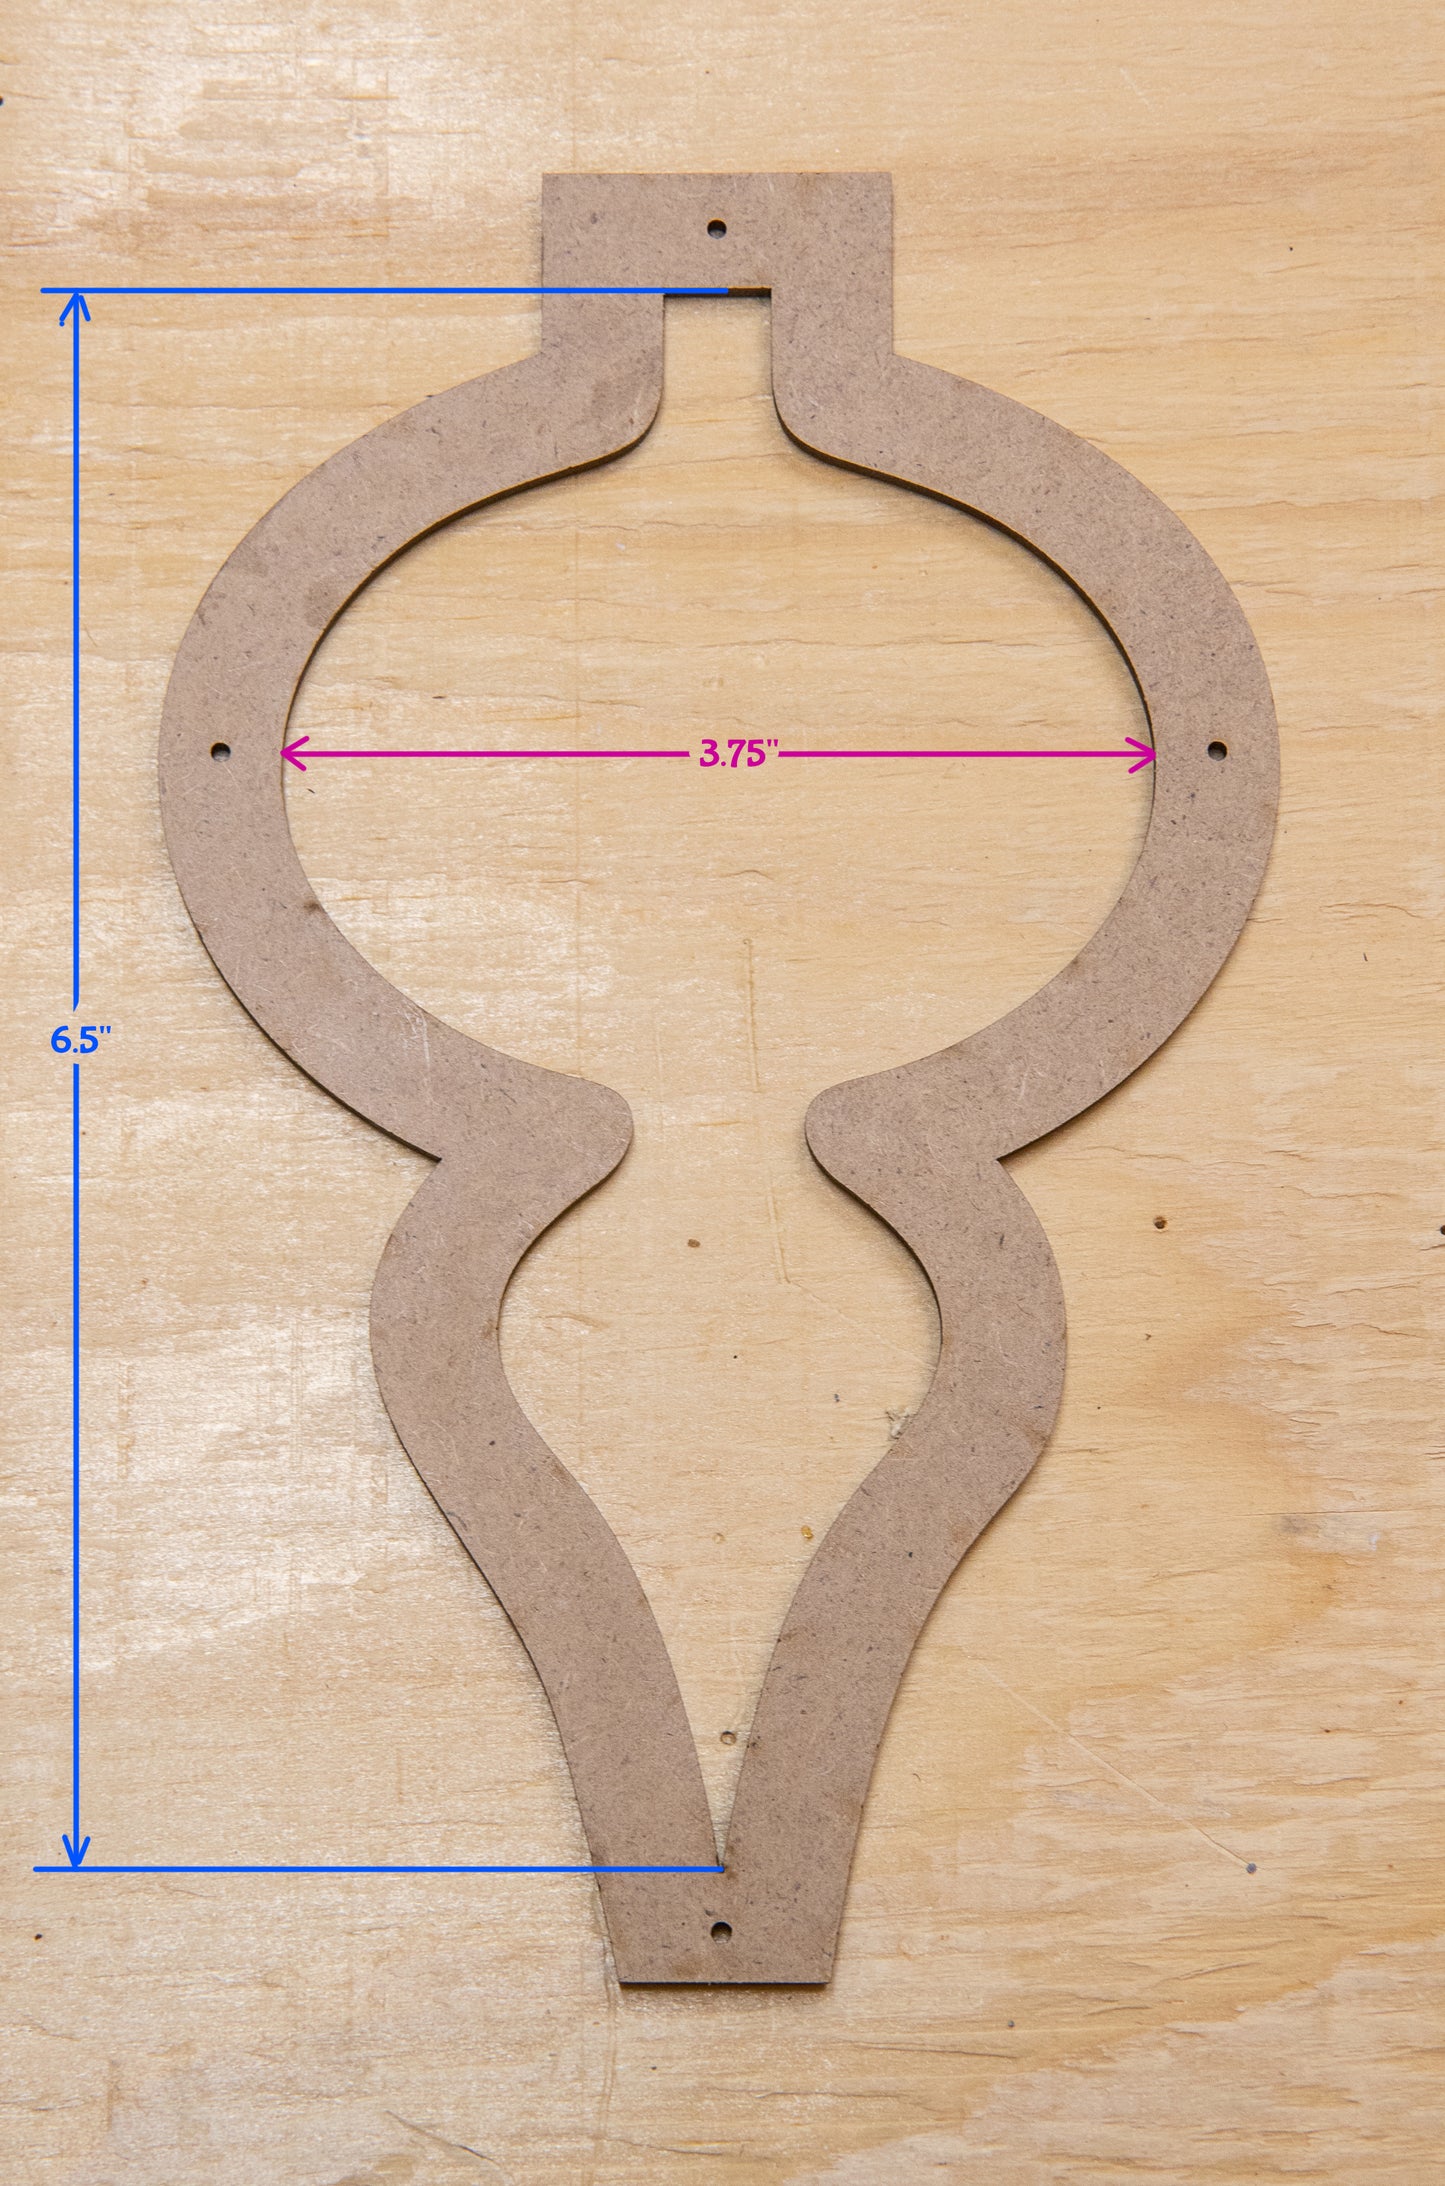 Glassola Tools Double Curve Ornament Layout Frame, with Measurements